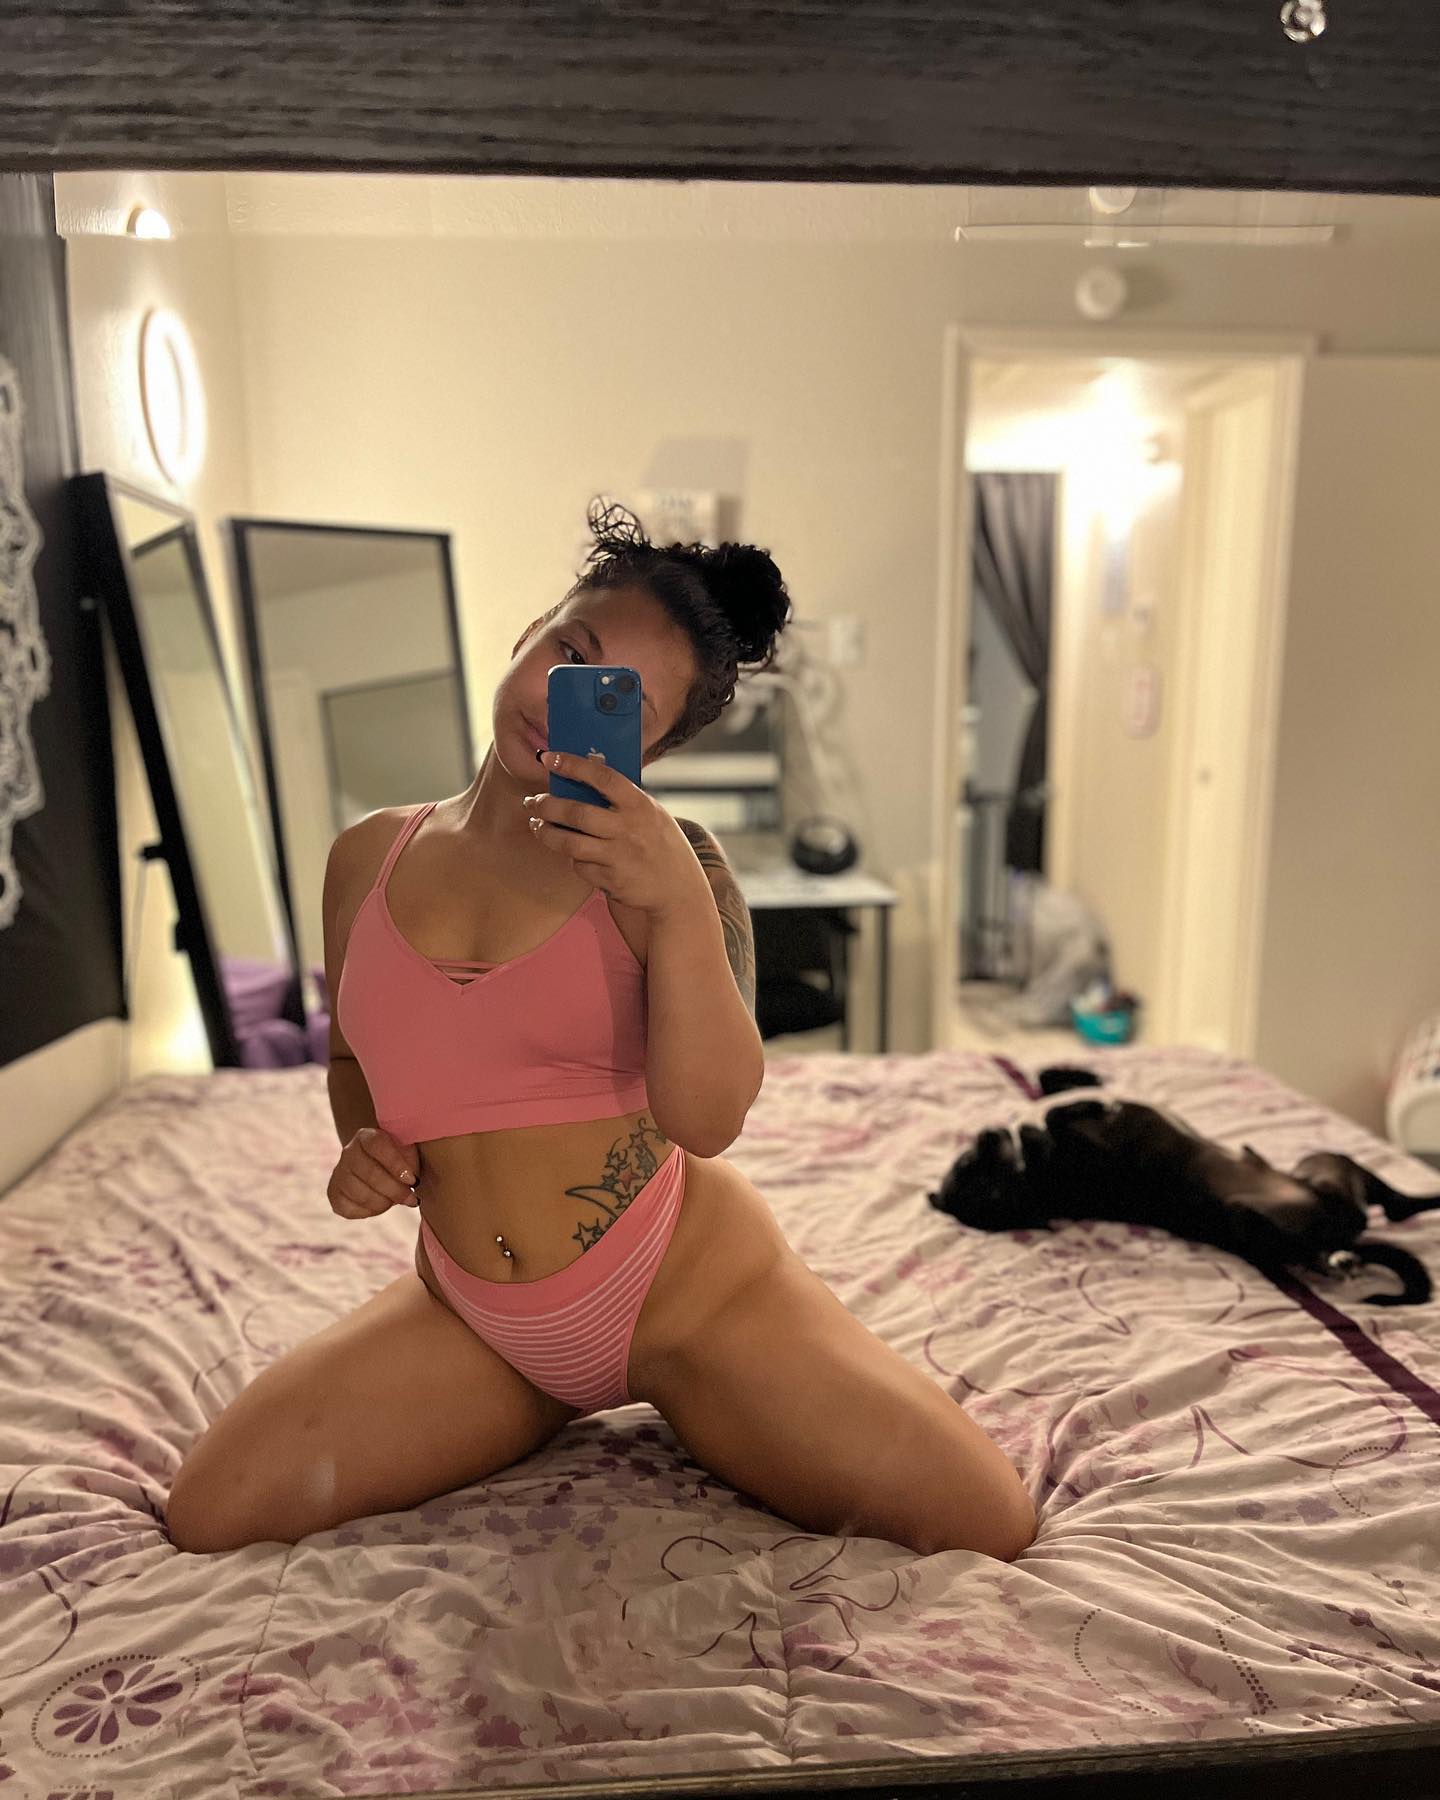 None of this is real 💖✨ well this body is 🤭